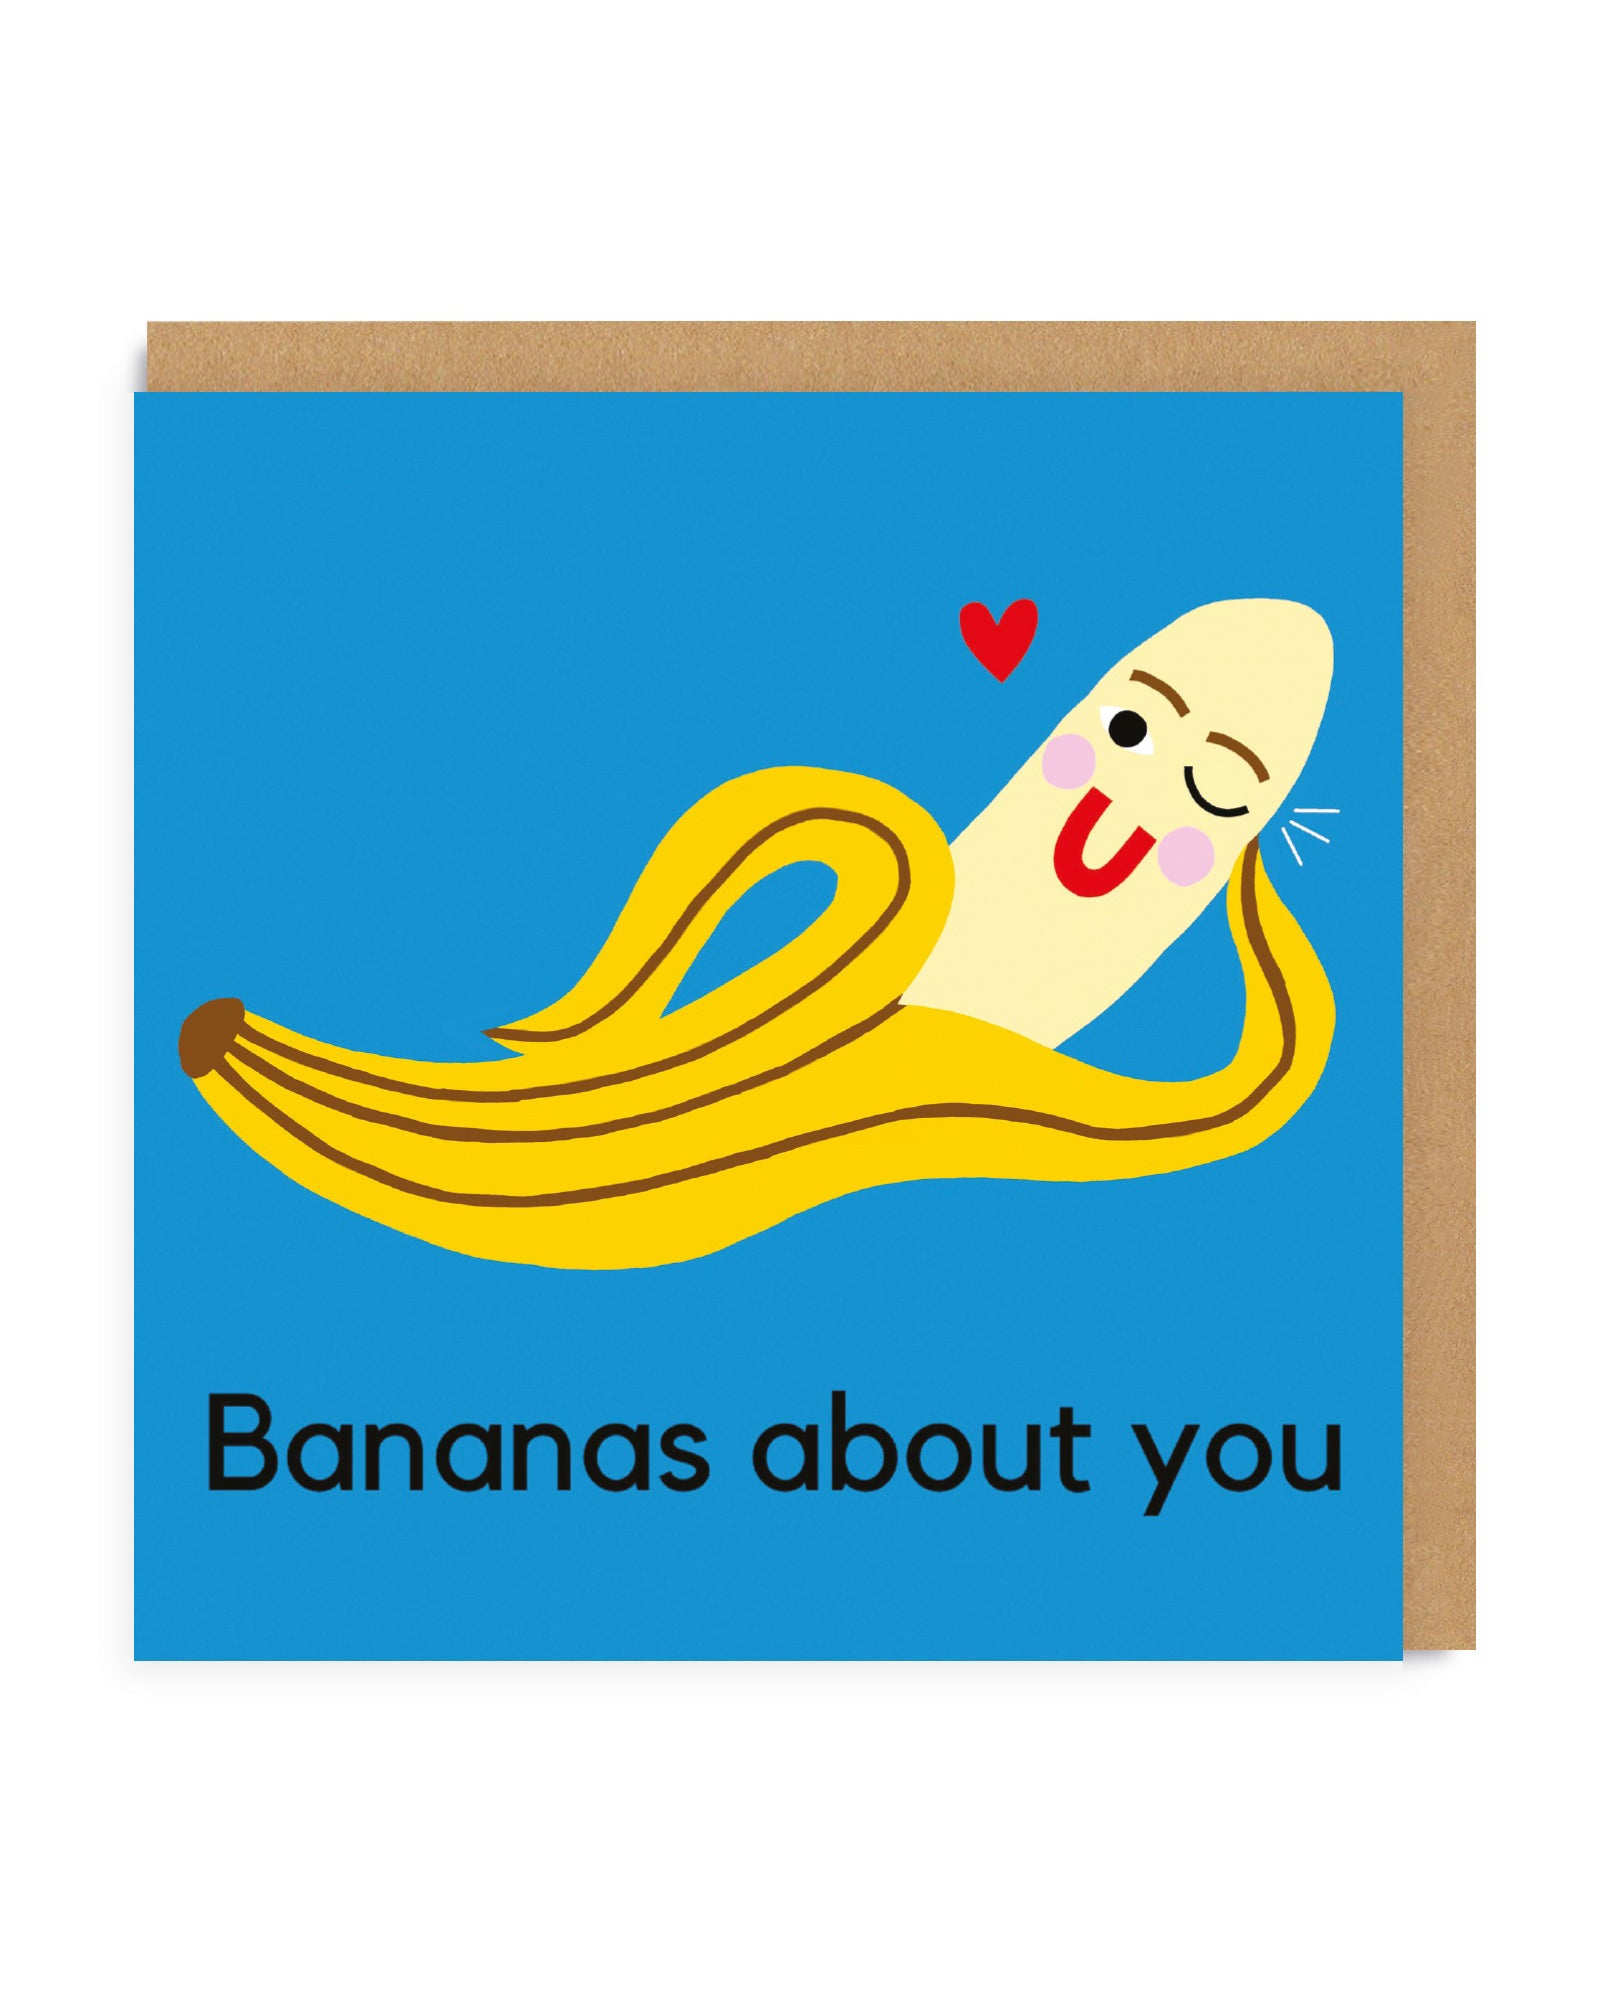 Valentine’s Day | Funny Valentines Card For Banana Lovers | Bananas About You Valentine’s Card | Ohh Deer Unique Valentine’s Card for Him or Her | Artwork by Ohh Deer | Made In The UK, Eco-Friendly Materials, Plastic Free Packaging